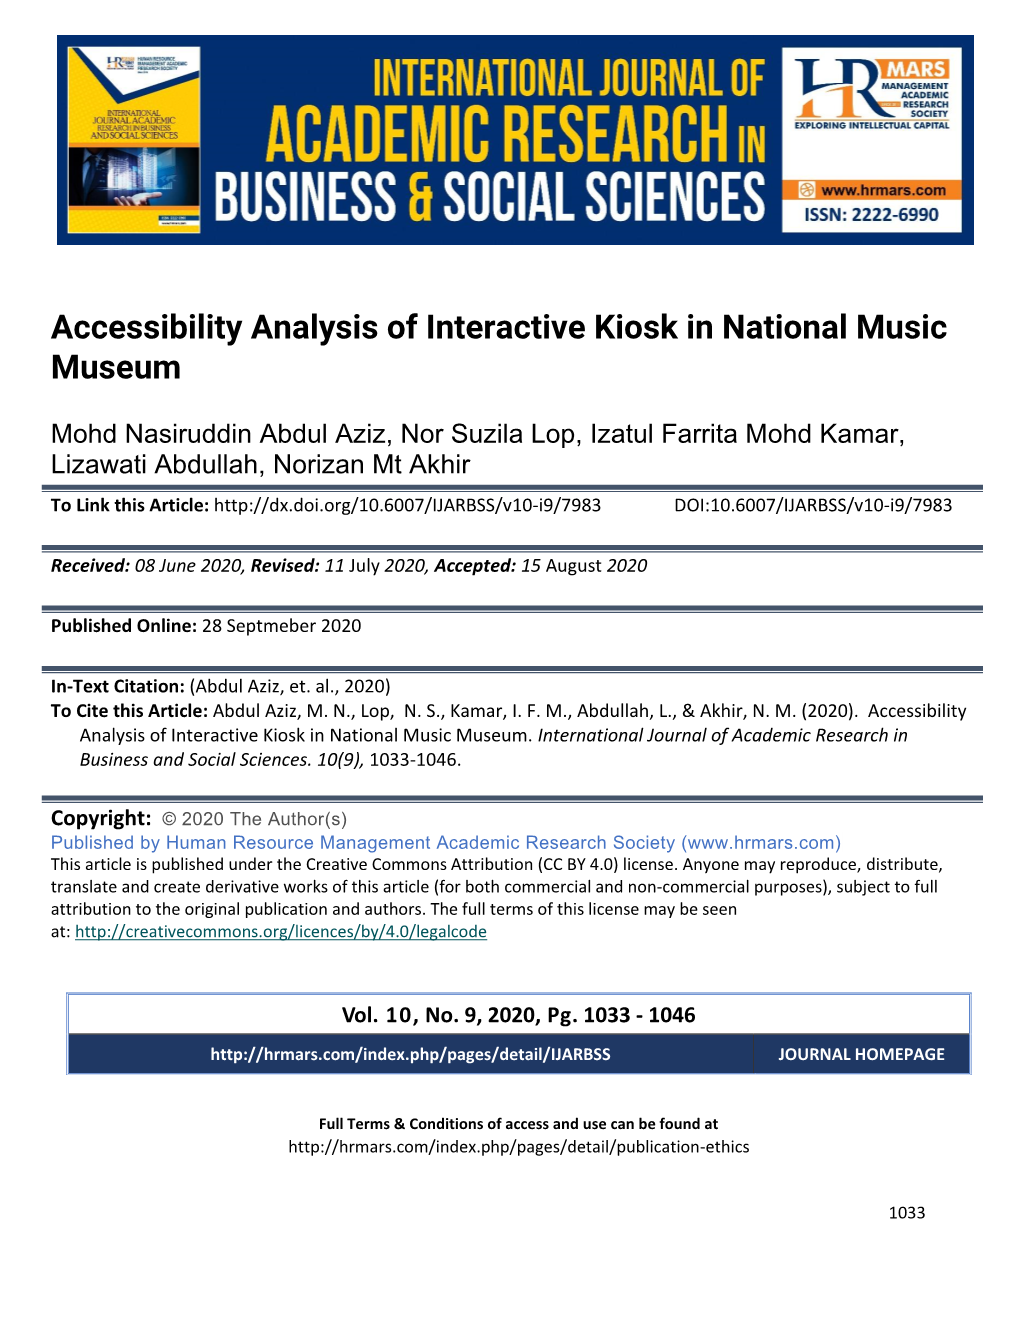 Accessibility Analysis of Interactive Kiosk in National Music Museum